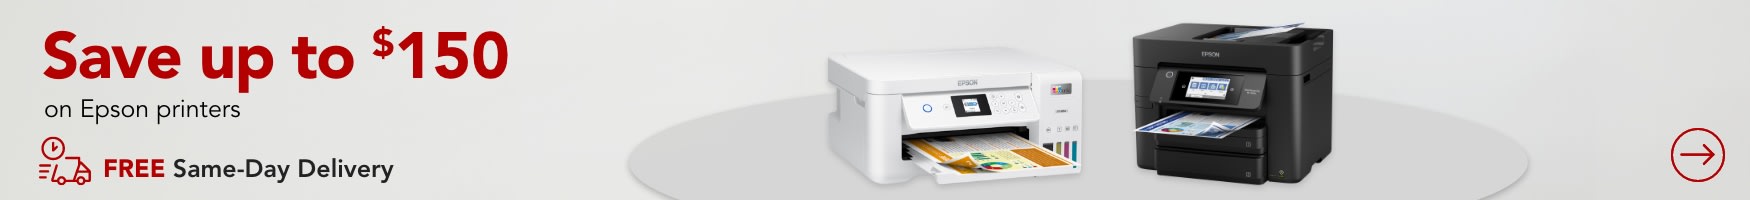 Save up to $150 on Epson Printers